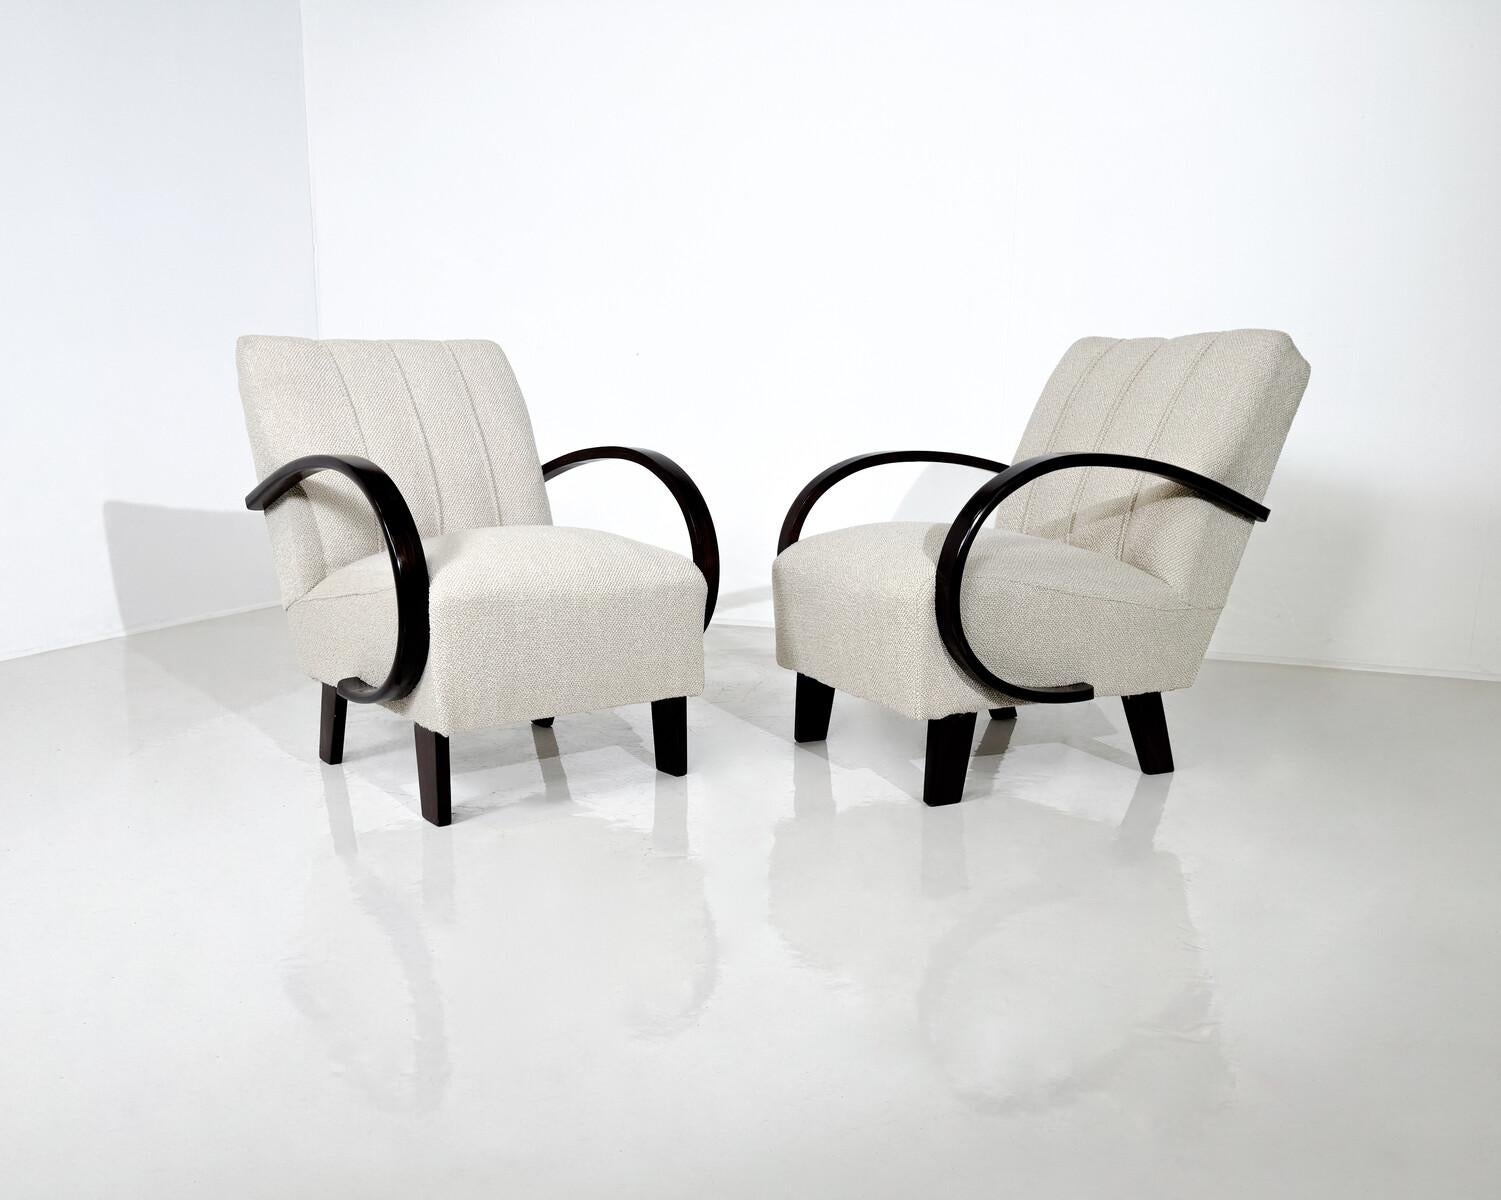 Pair of Bentwood Armchairs by Jindrich Halabala - Czech Republic 1940s For Sale 2